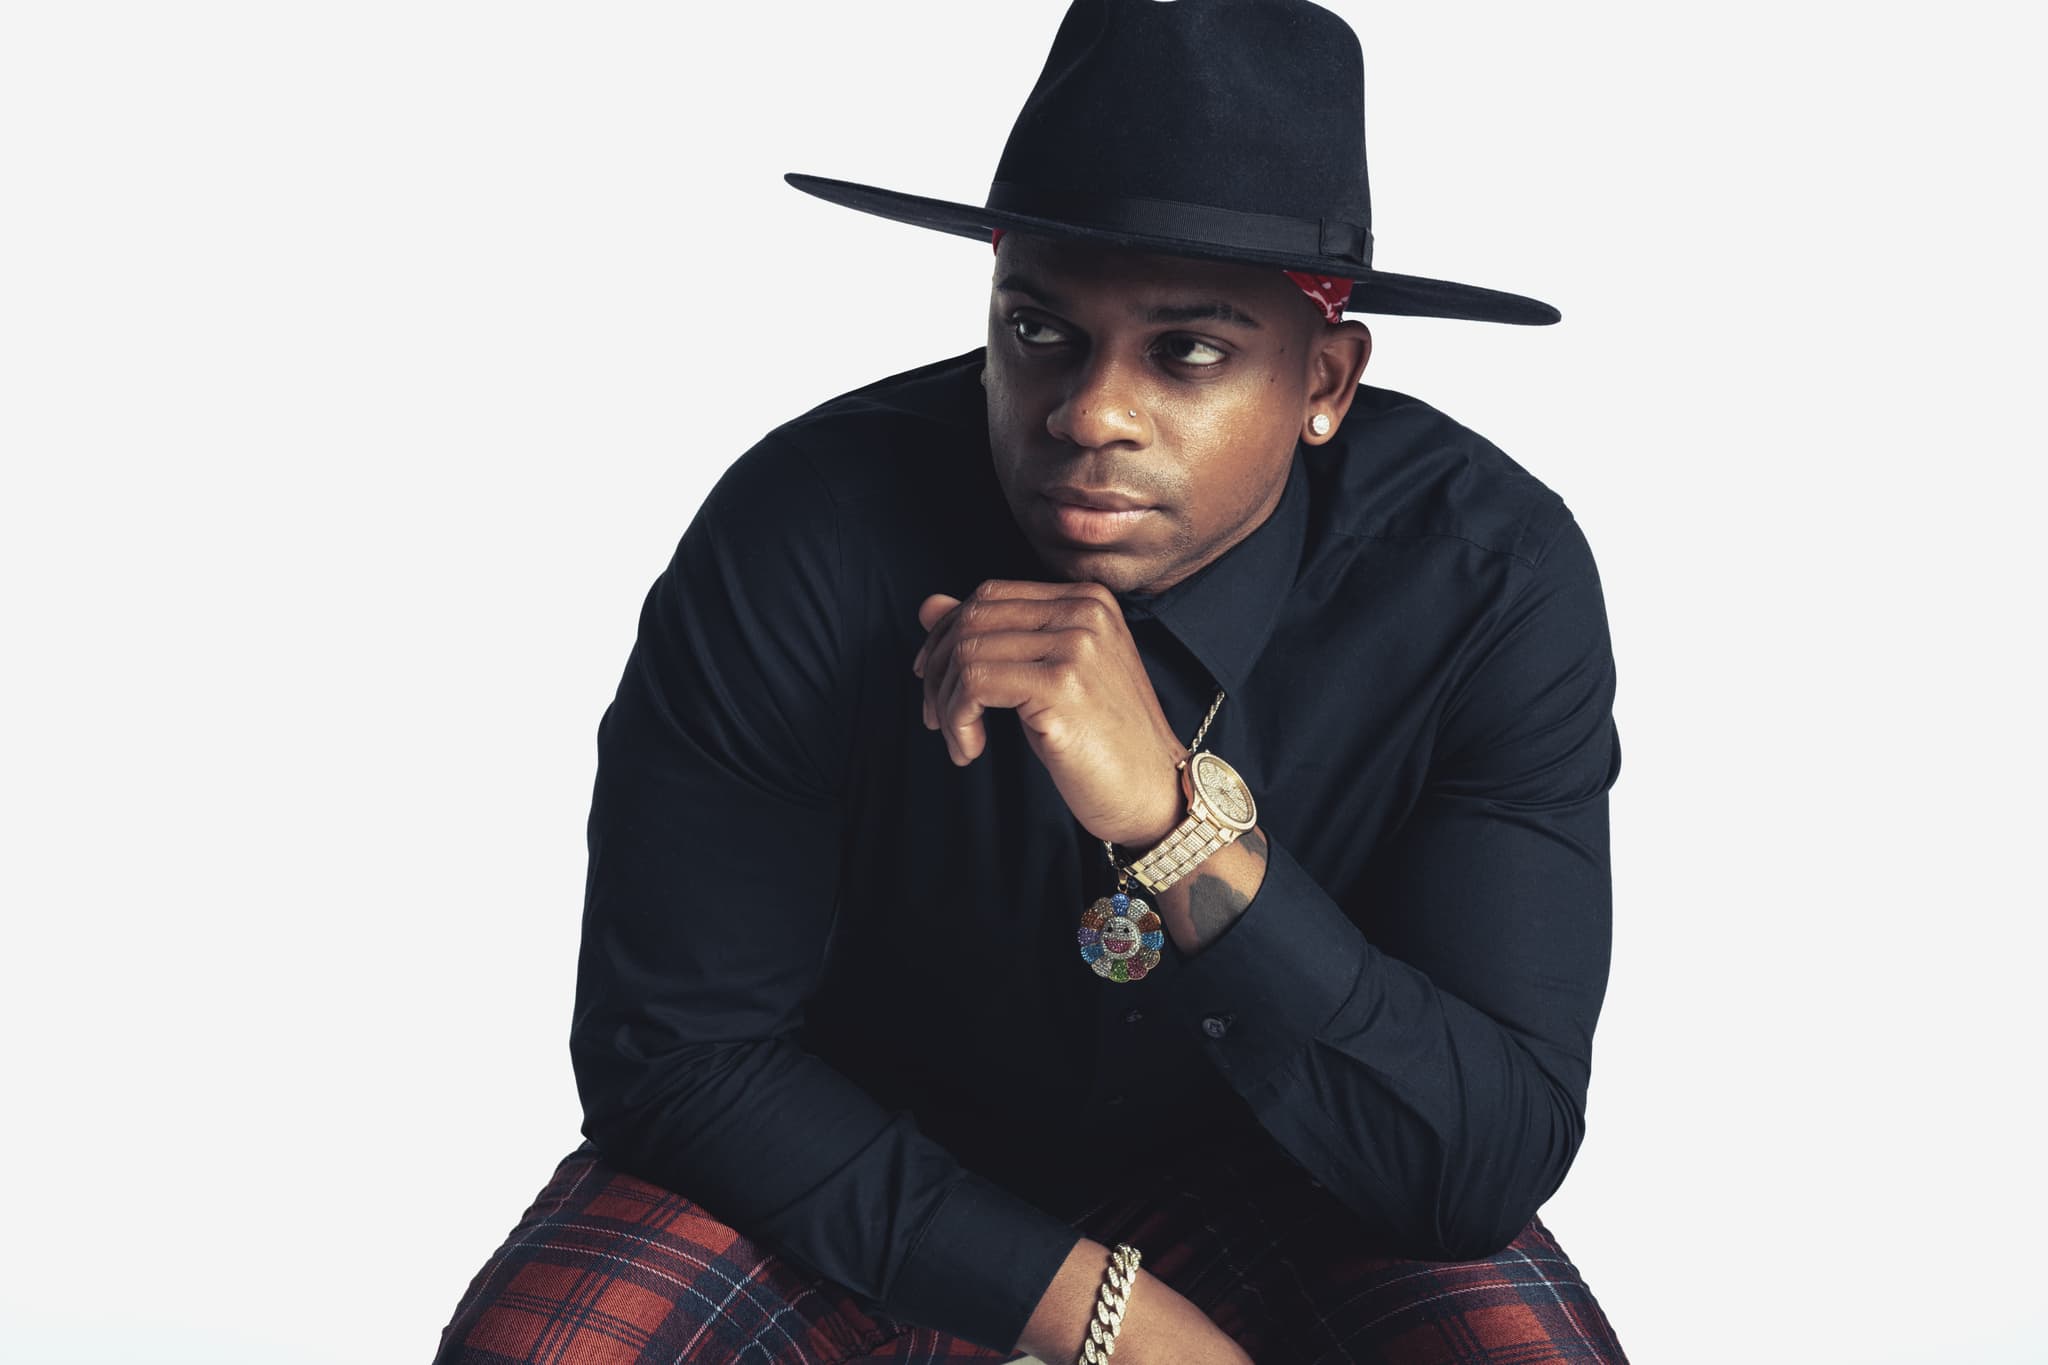 Jimmie Allen dressed in black with a black cowboy hat